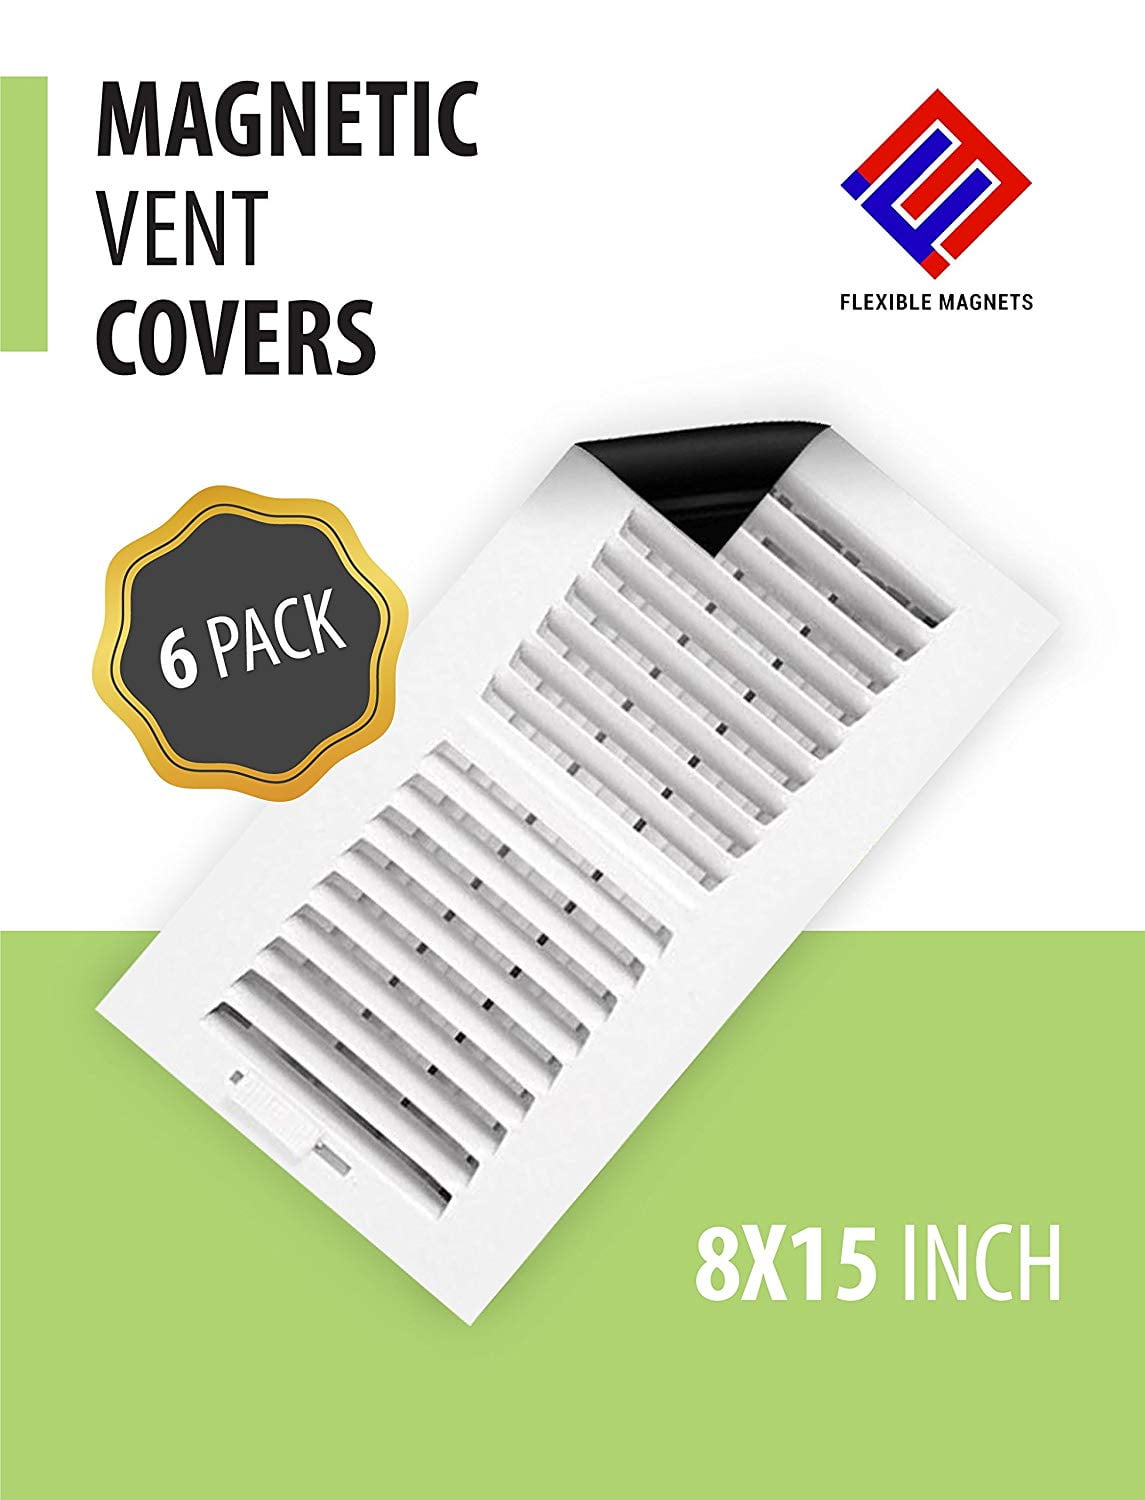 Magnetic Vent Cover - Magnetic Register Covers - Easy Comforts